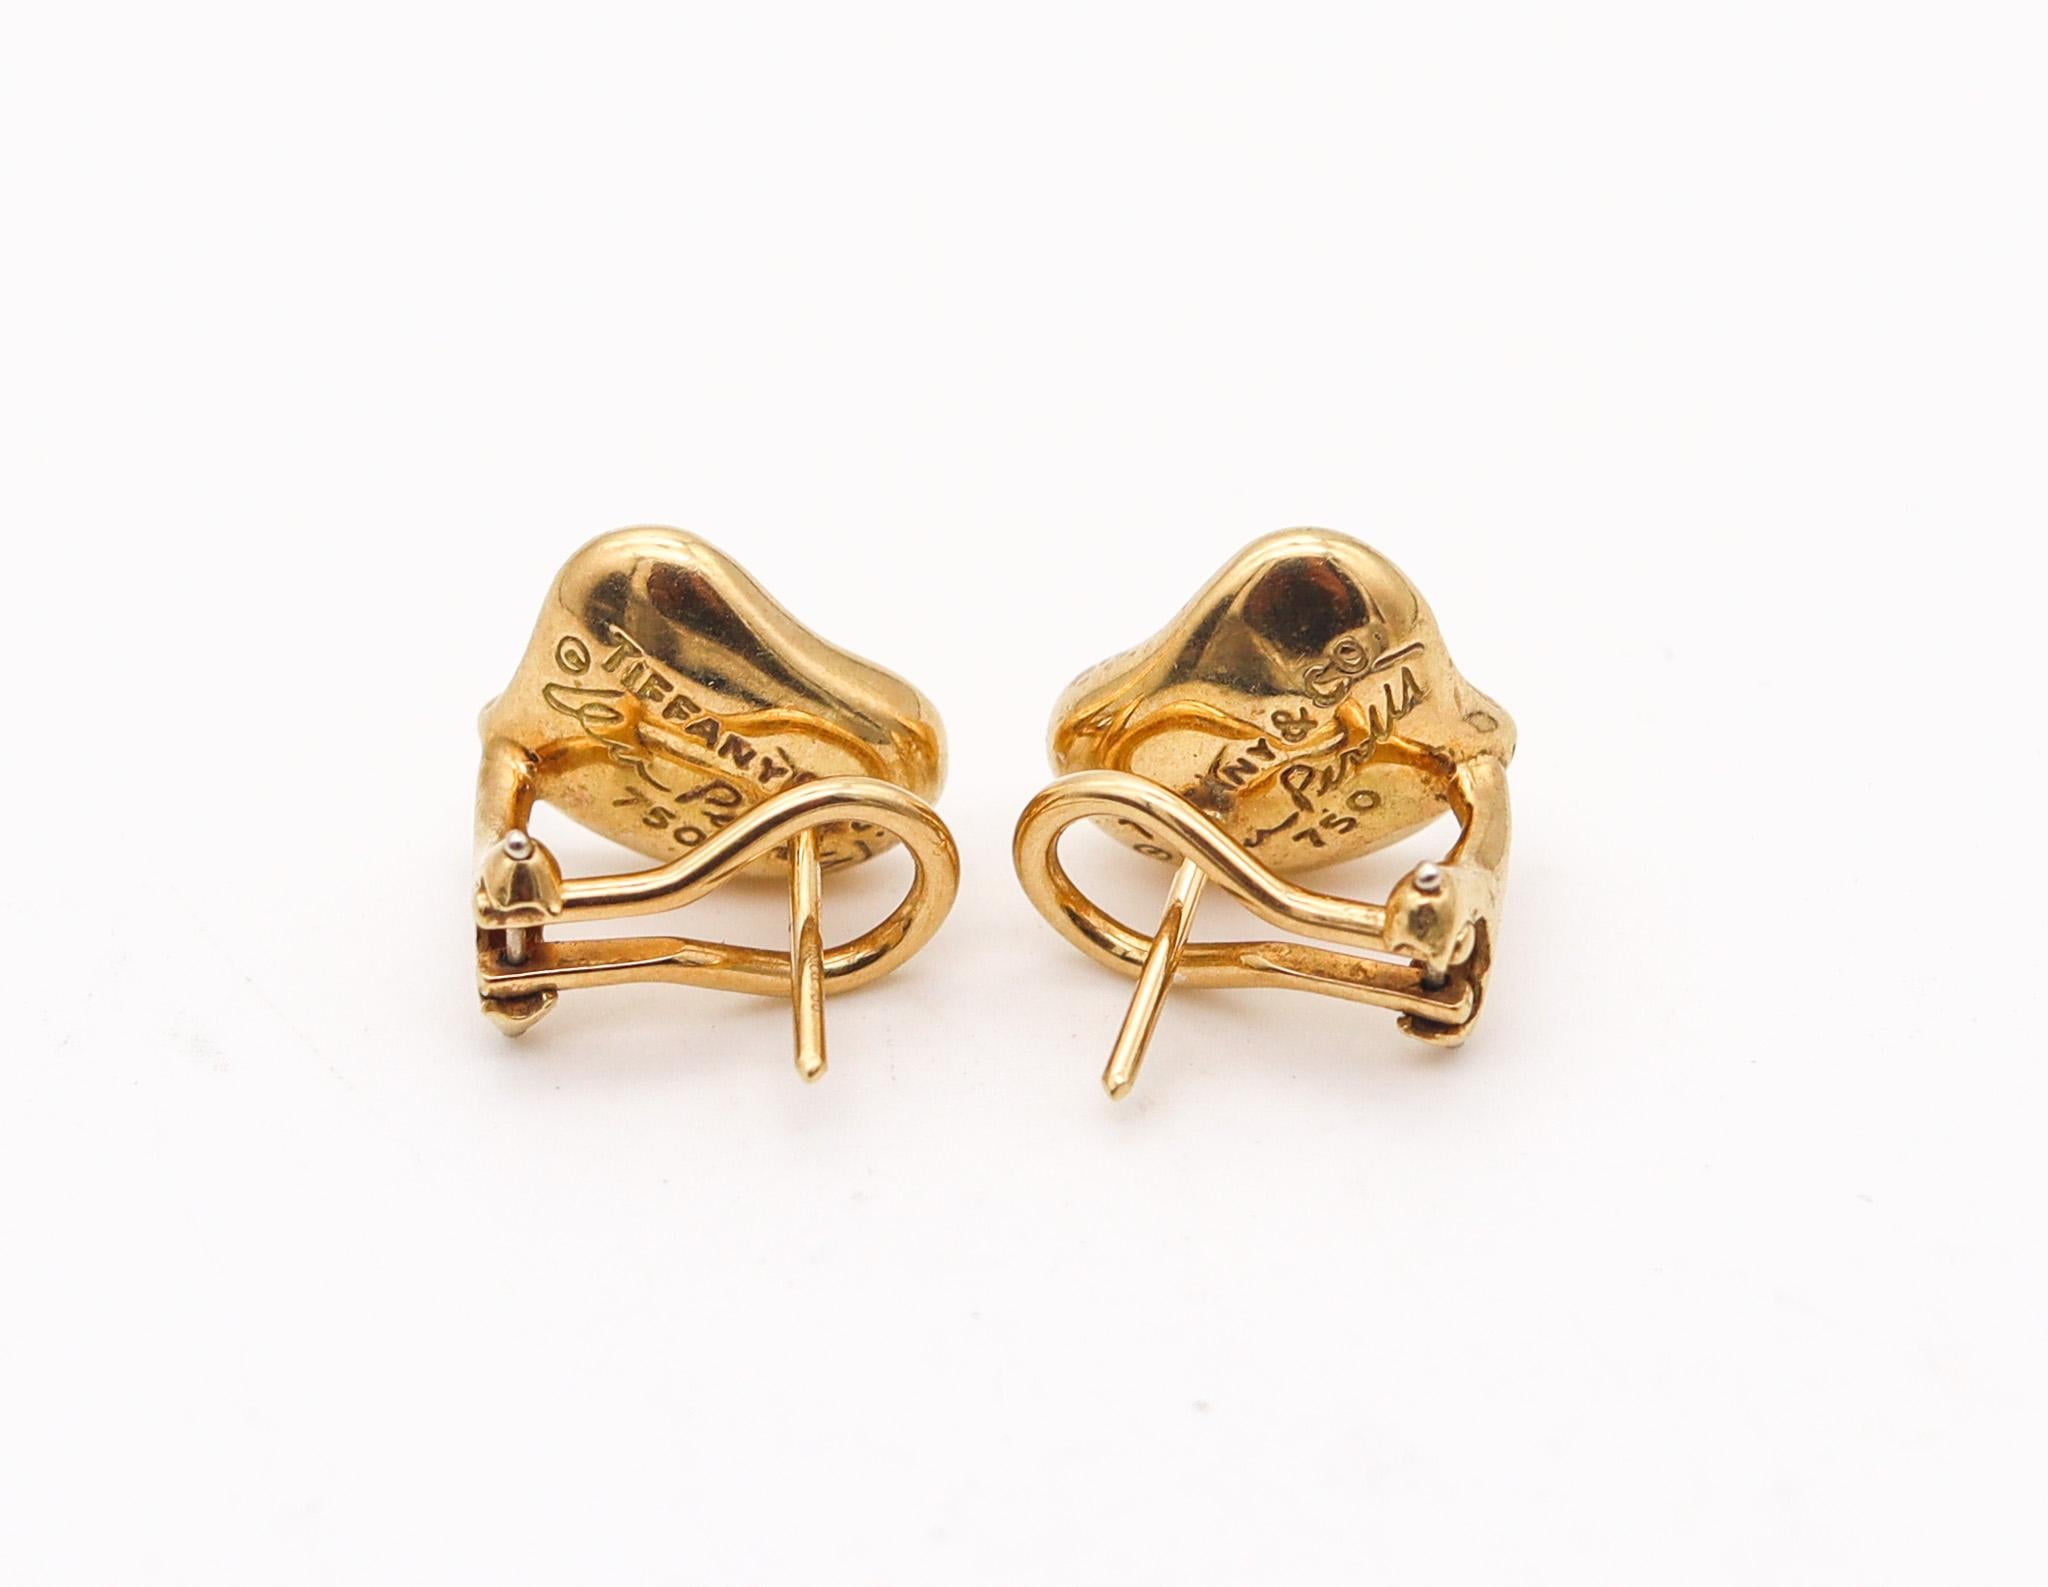 Modernist Tiffany & Co. 1981 By Elsa Peretti Free Form Hearts Earrings In 18Kt Yellow Gold For Sale